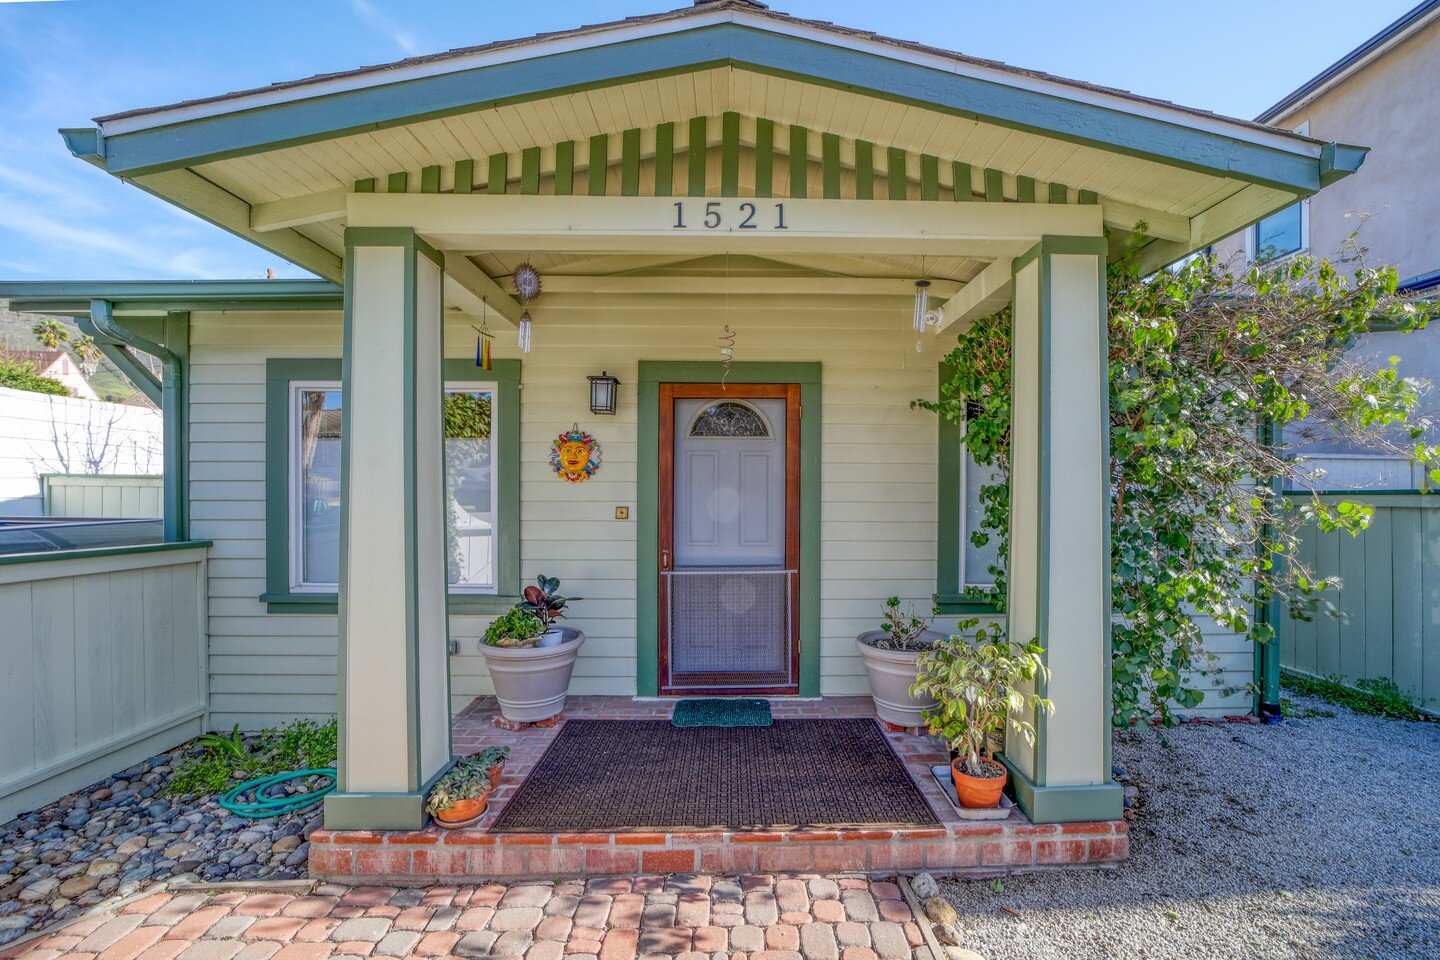 New Listing! 

1521 Palm
San Luis Obispo, CA 93401

Charming 1920's cottage bungalow featuring 2 bedrooms 1 bath, a detached exercise room/artist studio and a creek running through the back of the property. The current owners have enjoyed this quiet 